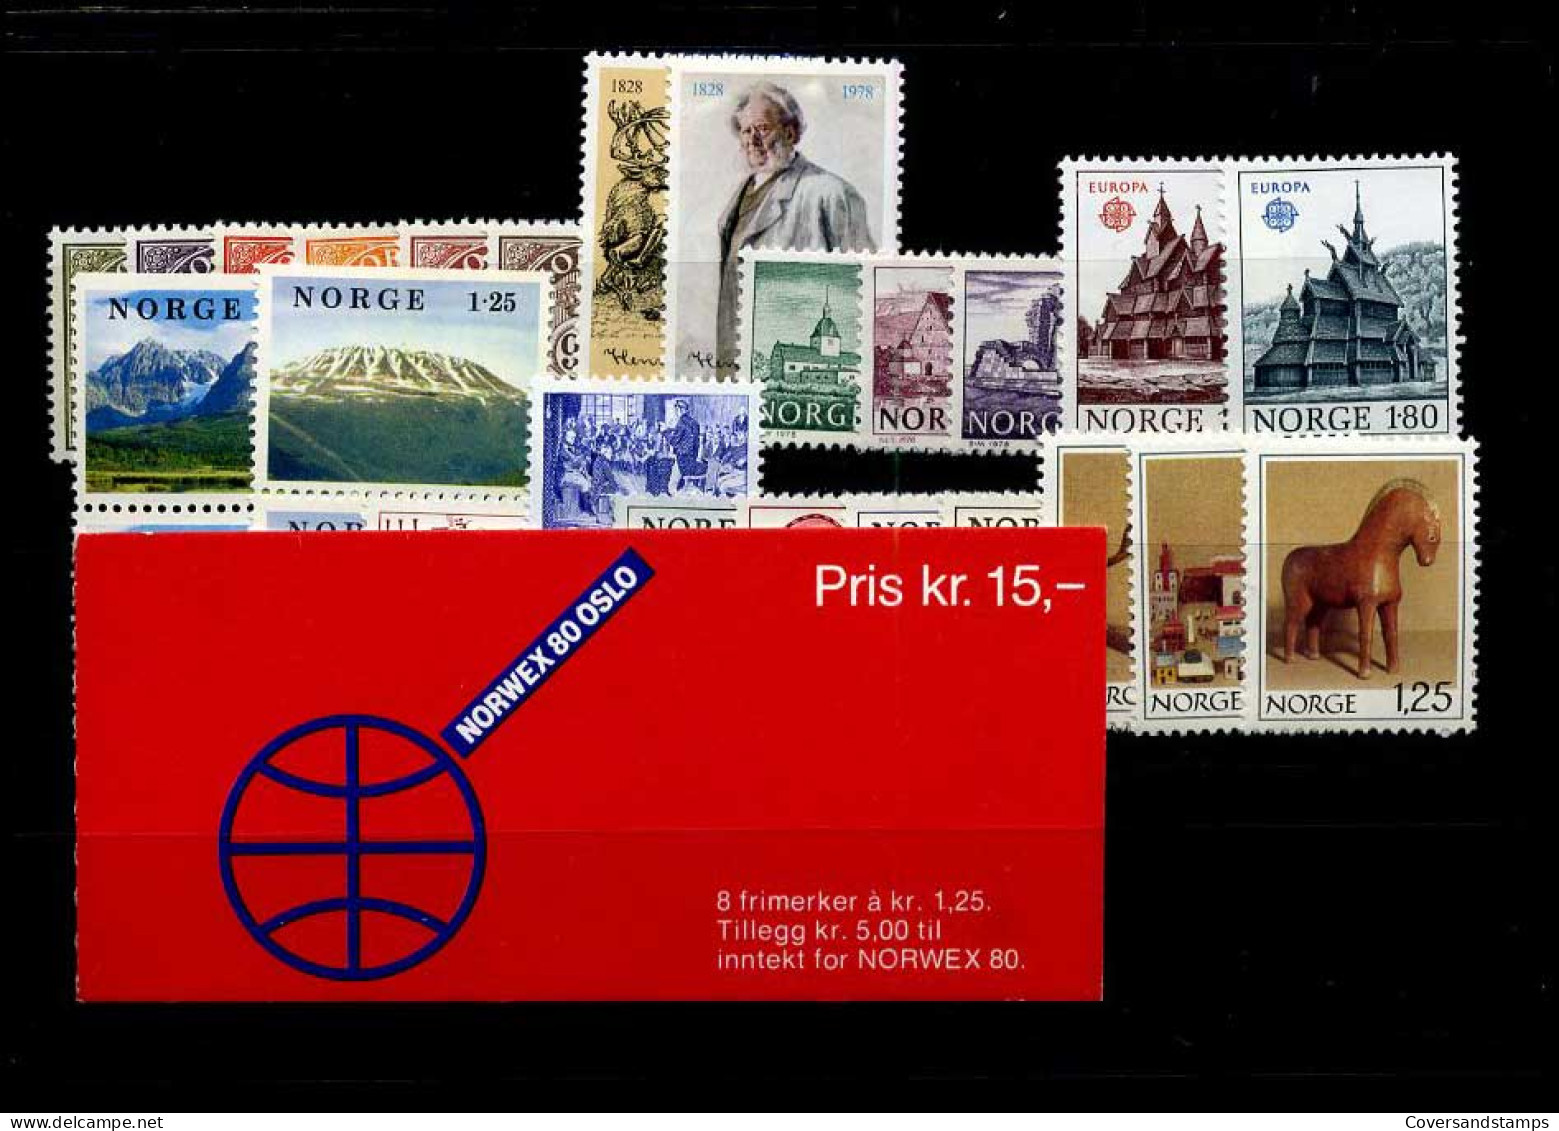 Norway - Yearset 1978 - MNH - Años Completos